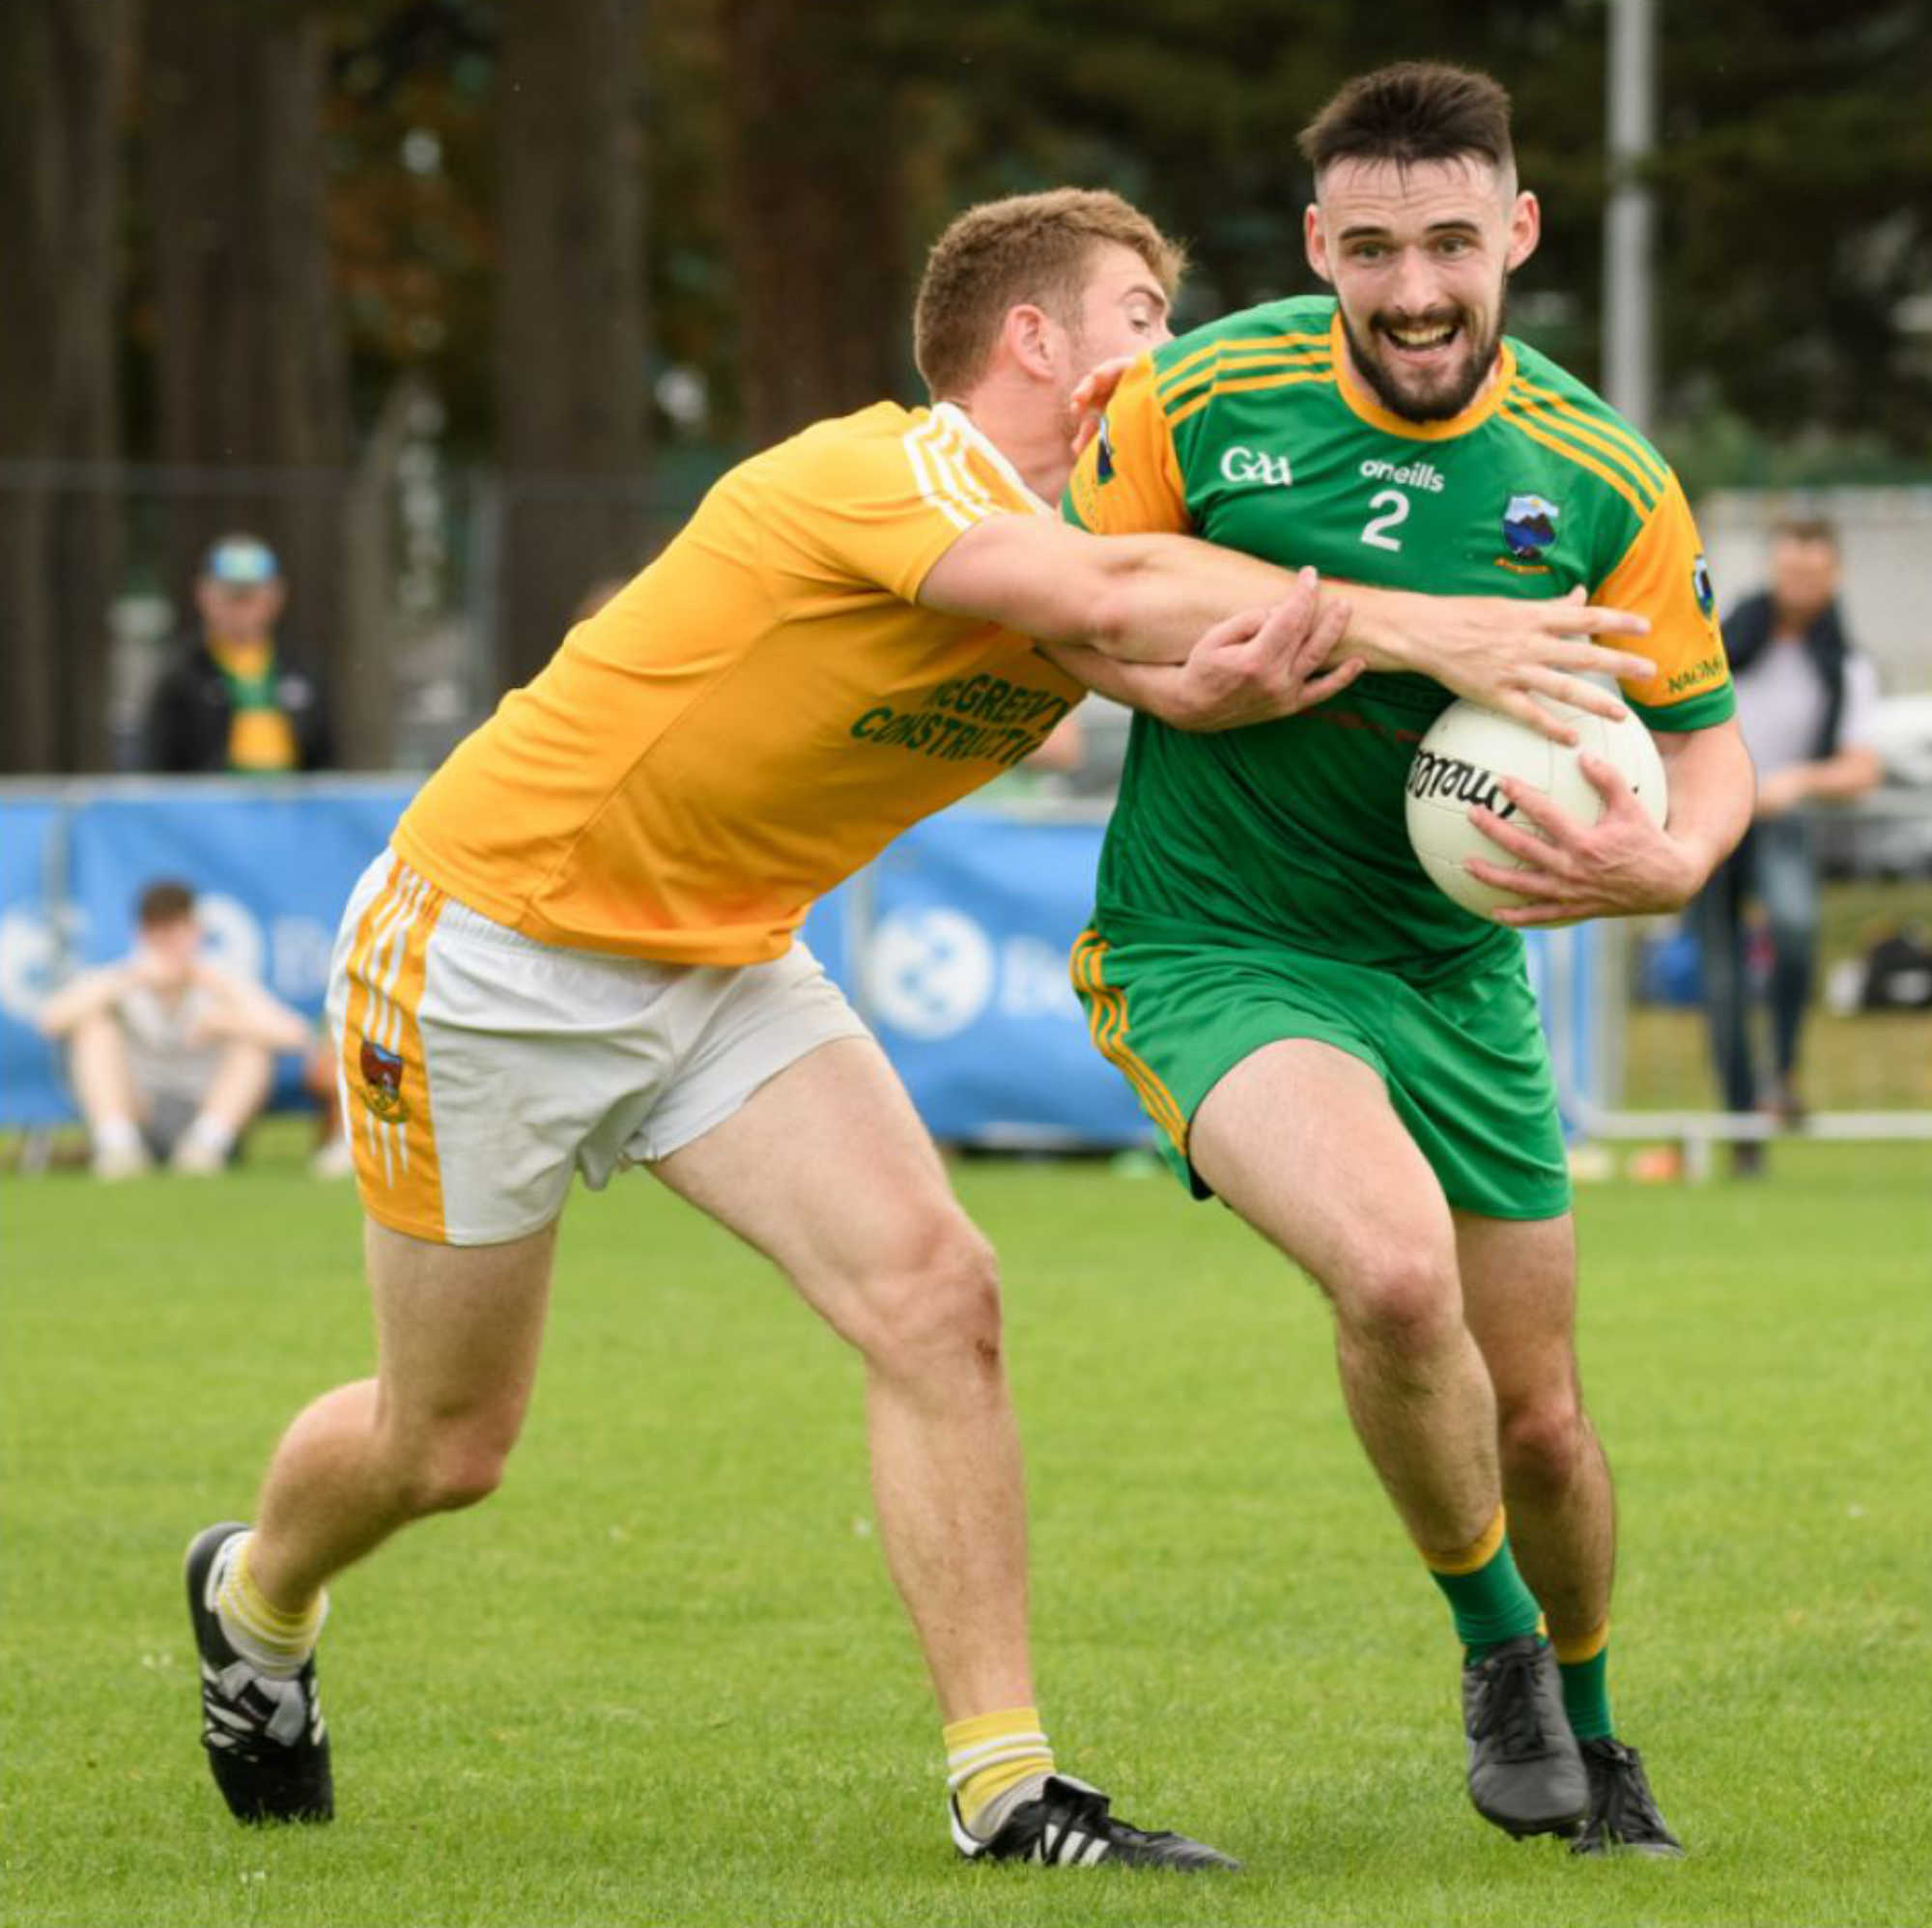 3D's Philip Doherty in action for Naomh Columba in the 2022 Kilmacud Crokes 7's